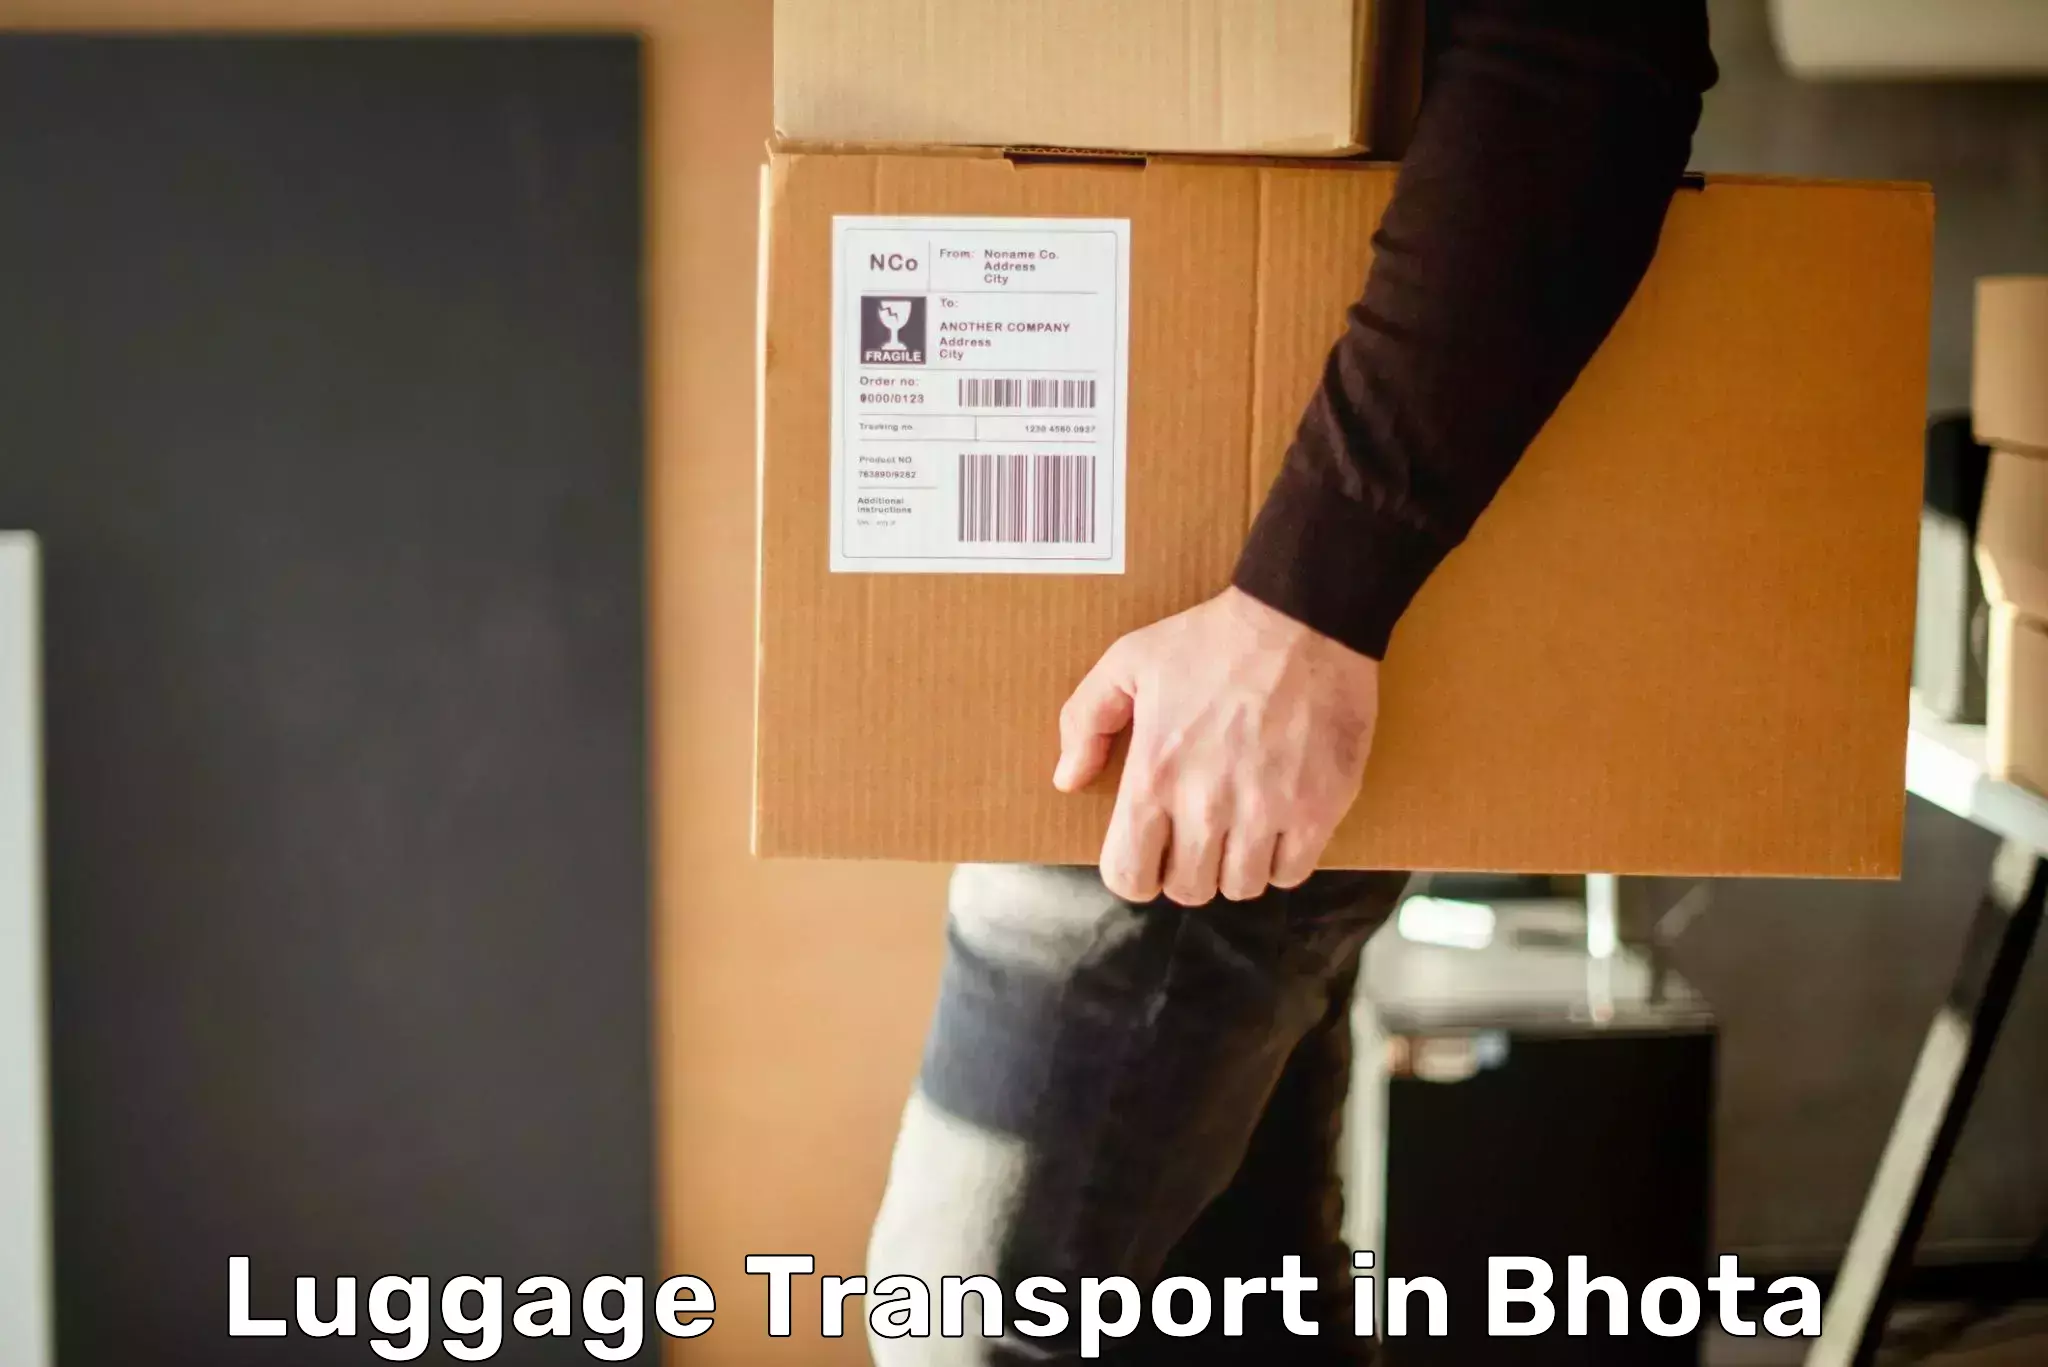 Baggage transport technology in Bhota